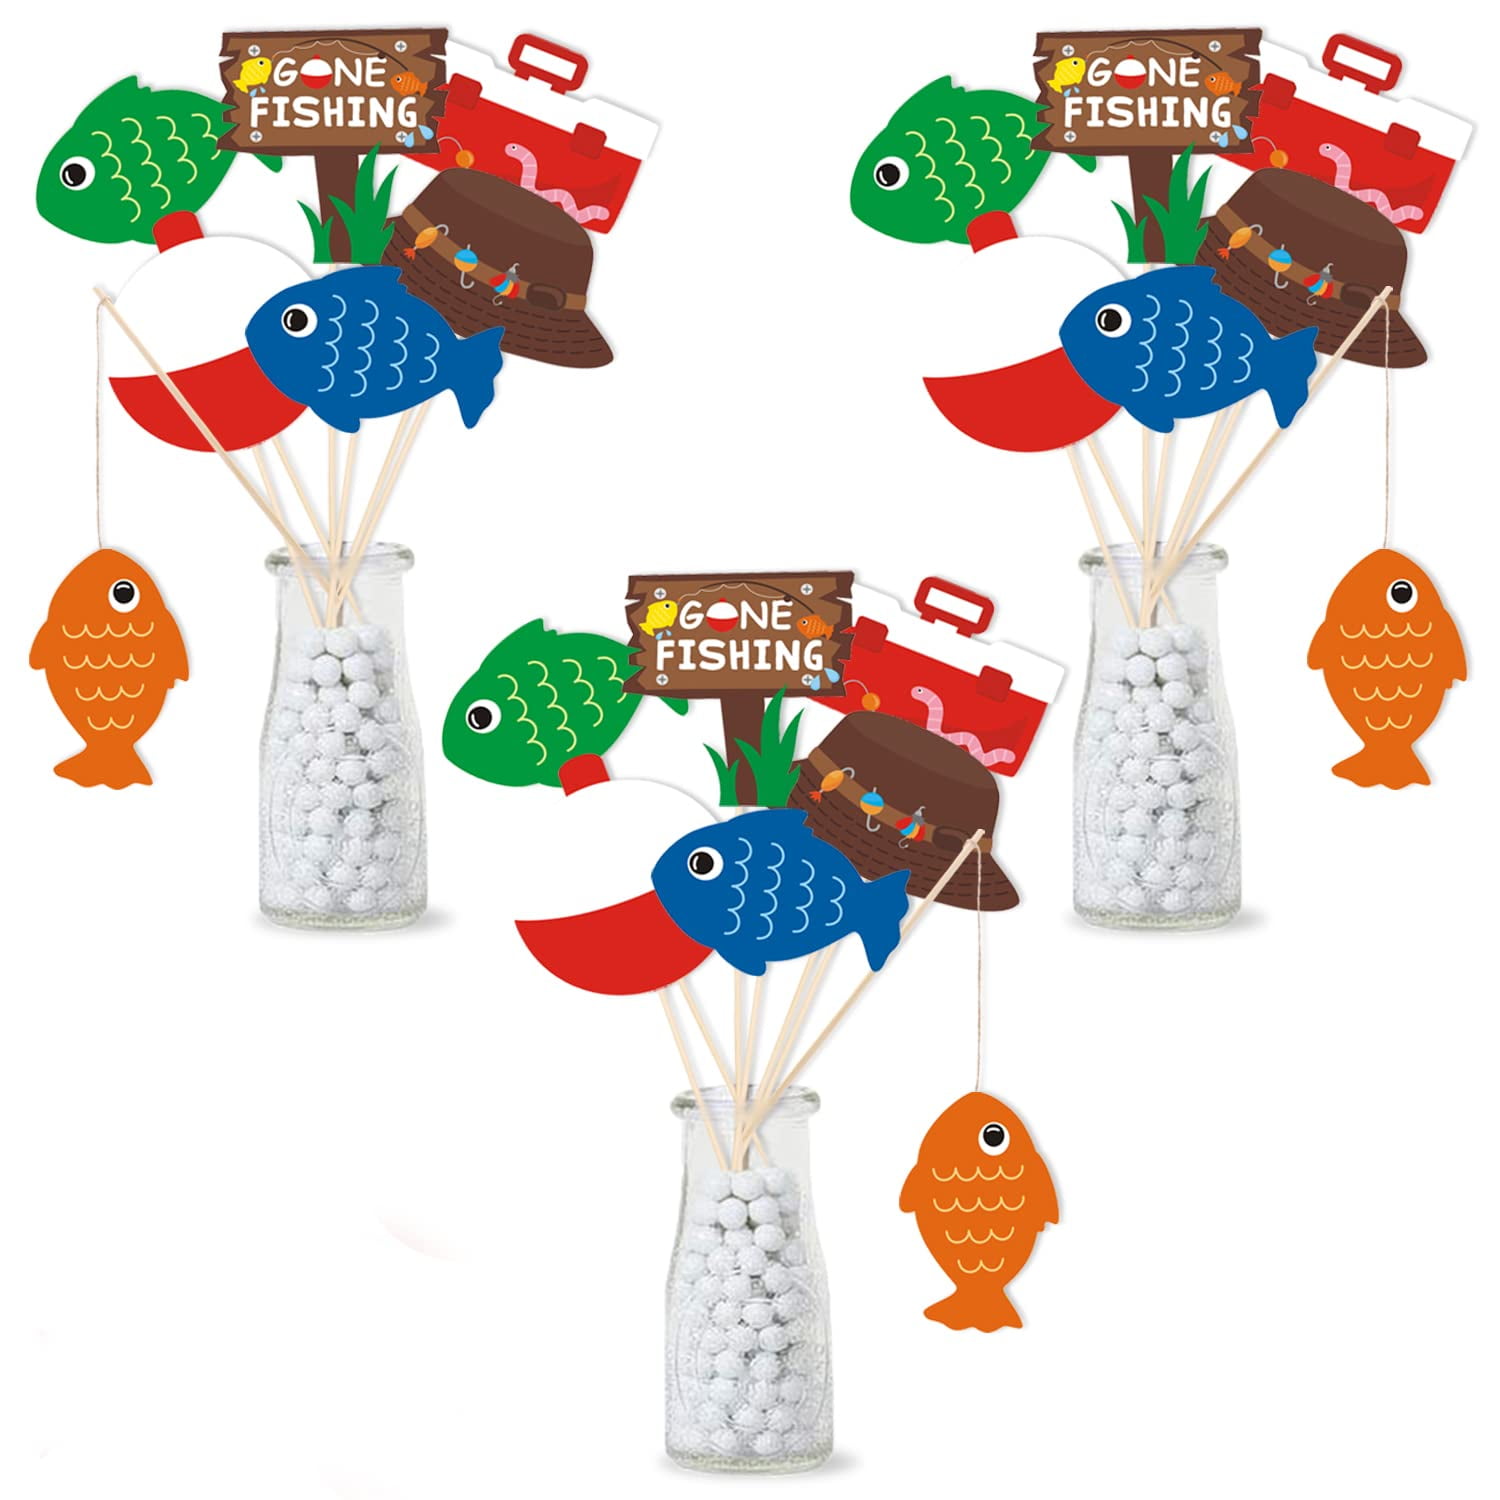 21 Pack Gone Fishing SE33 Theme Little Fisherman The Big One Party  Centerpiece Sticks Bobber Table Toppers Kids Fishes Reel Fun Birthday Ideas  Photo